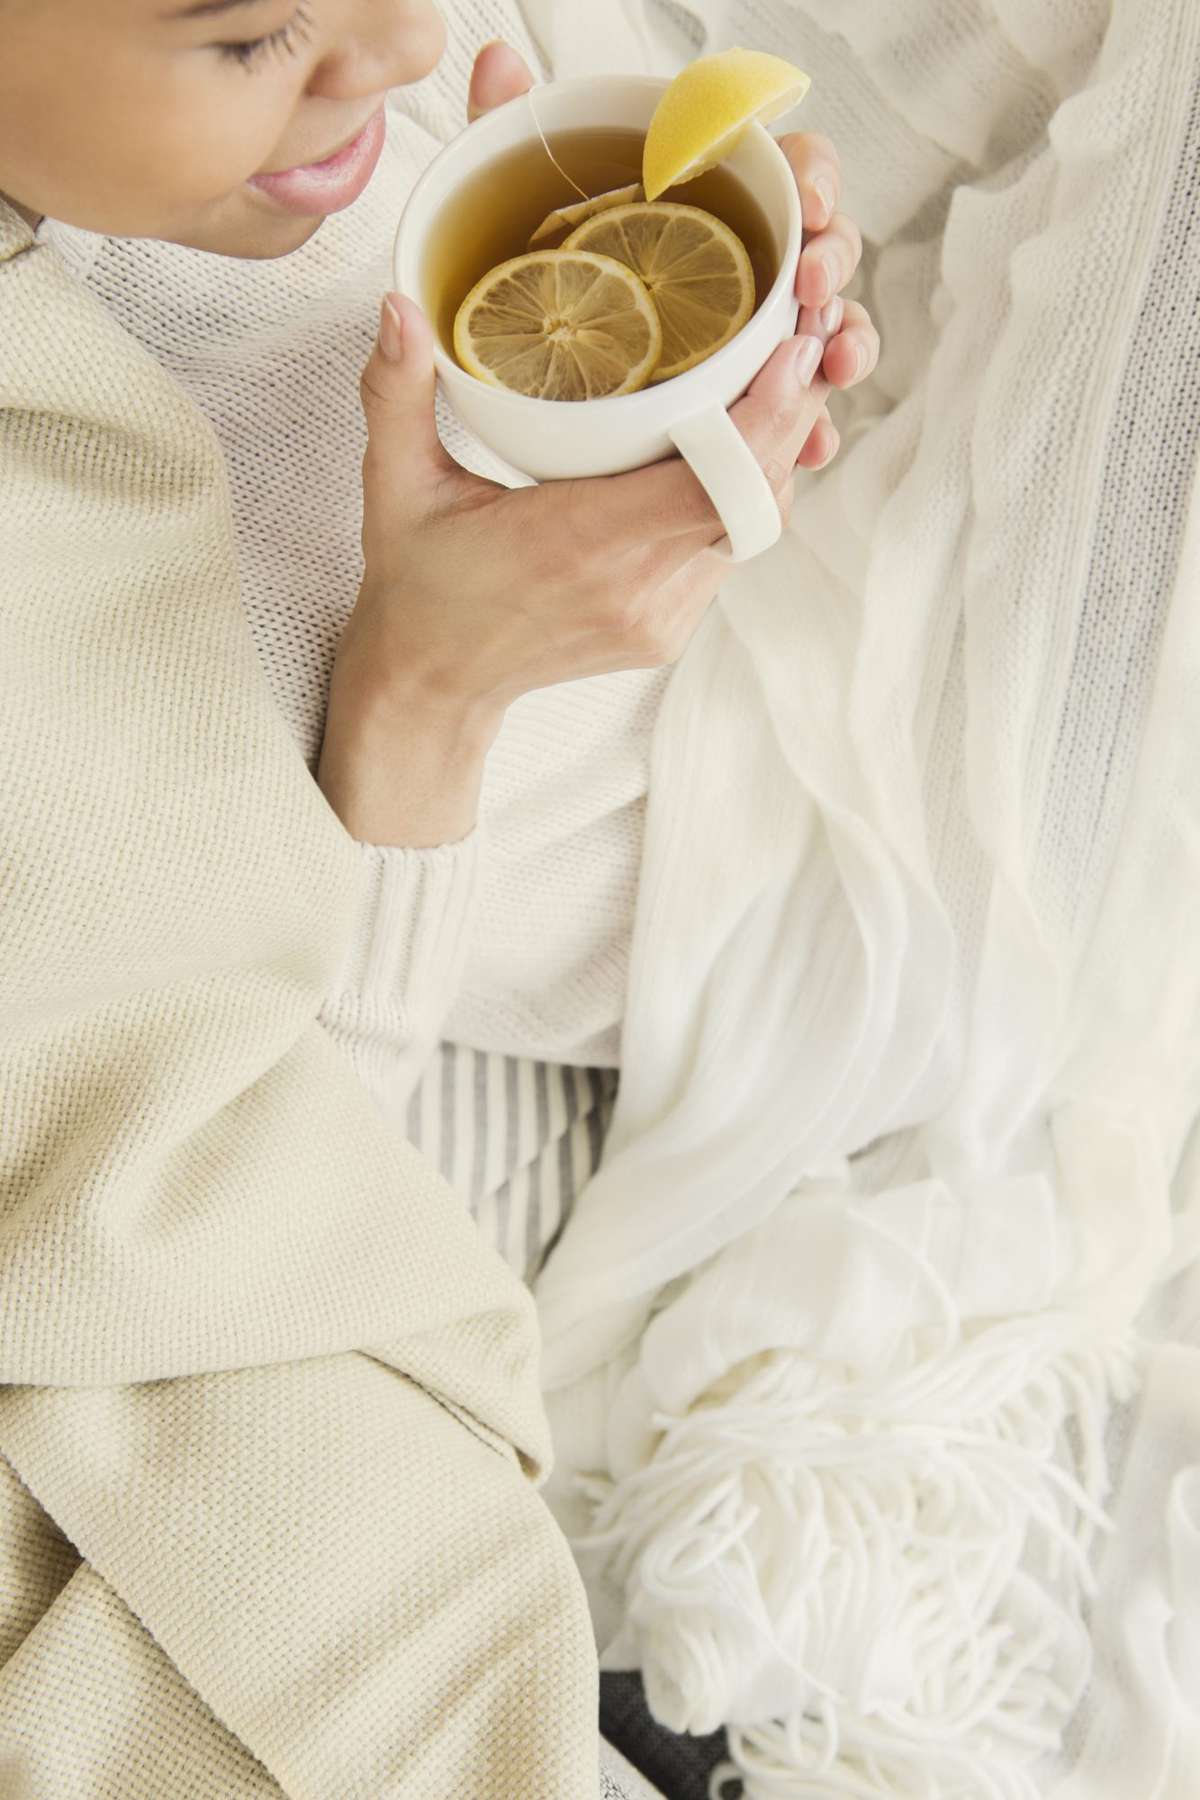 Woman drinking herbal tea with fruit